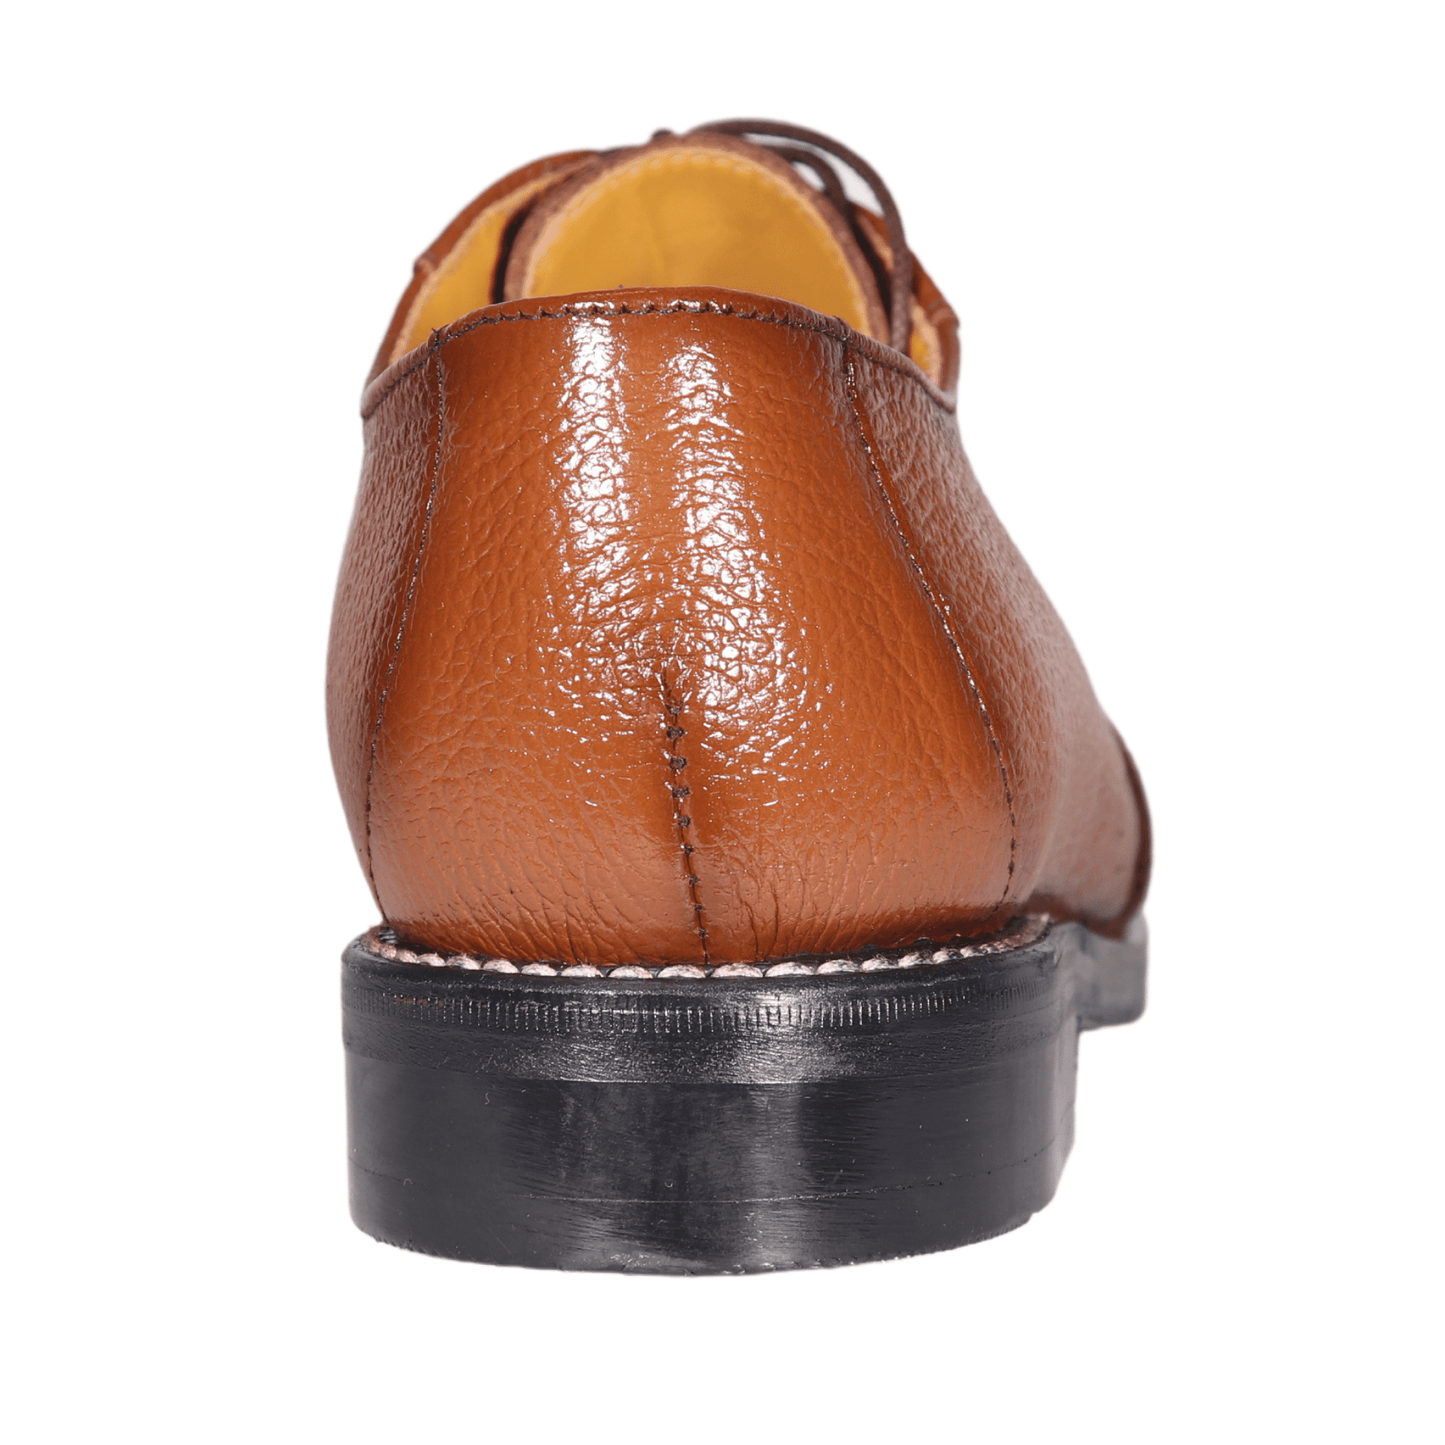 Johnston & Murphy Tan Welted Lace-up